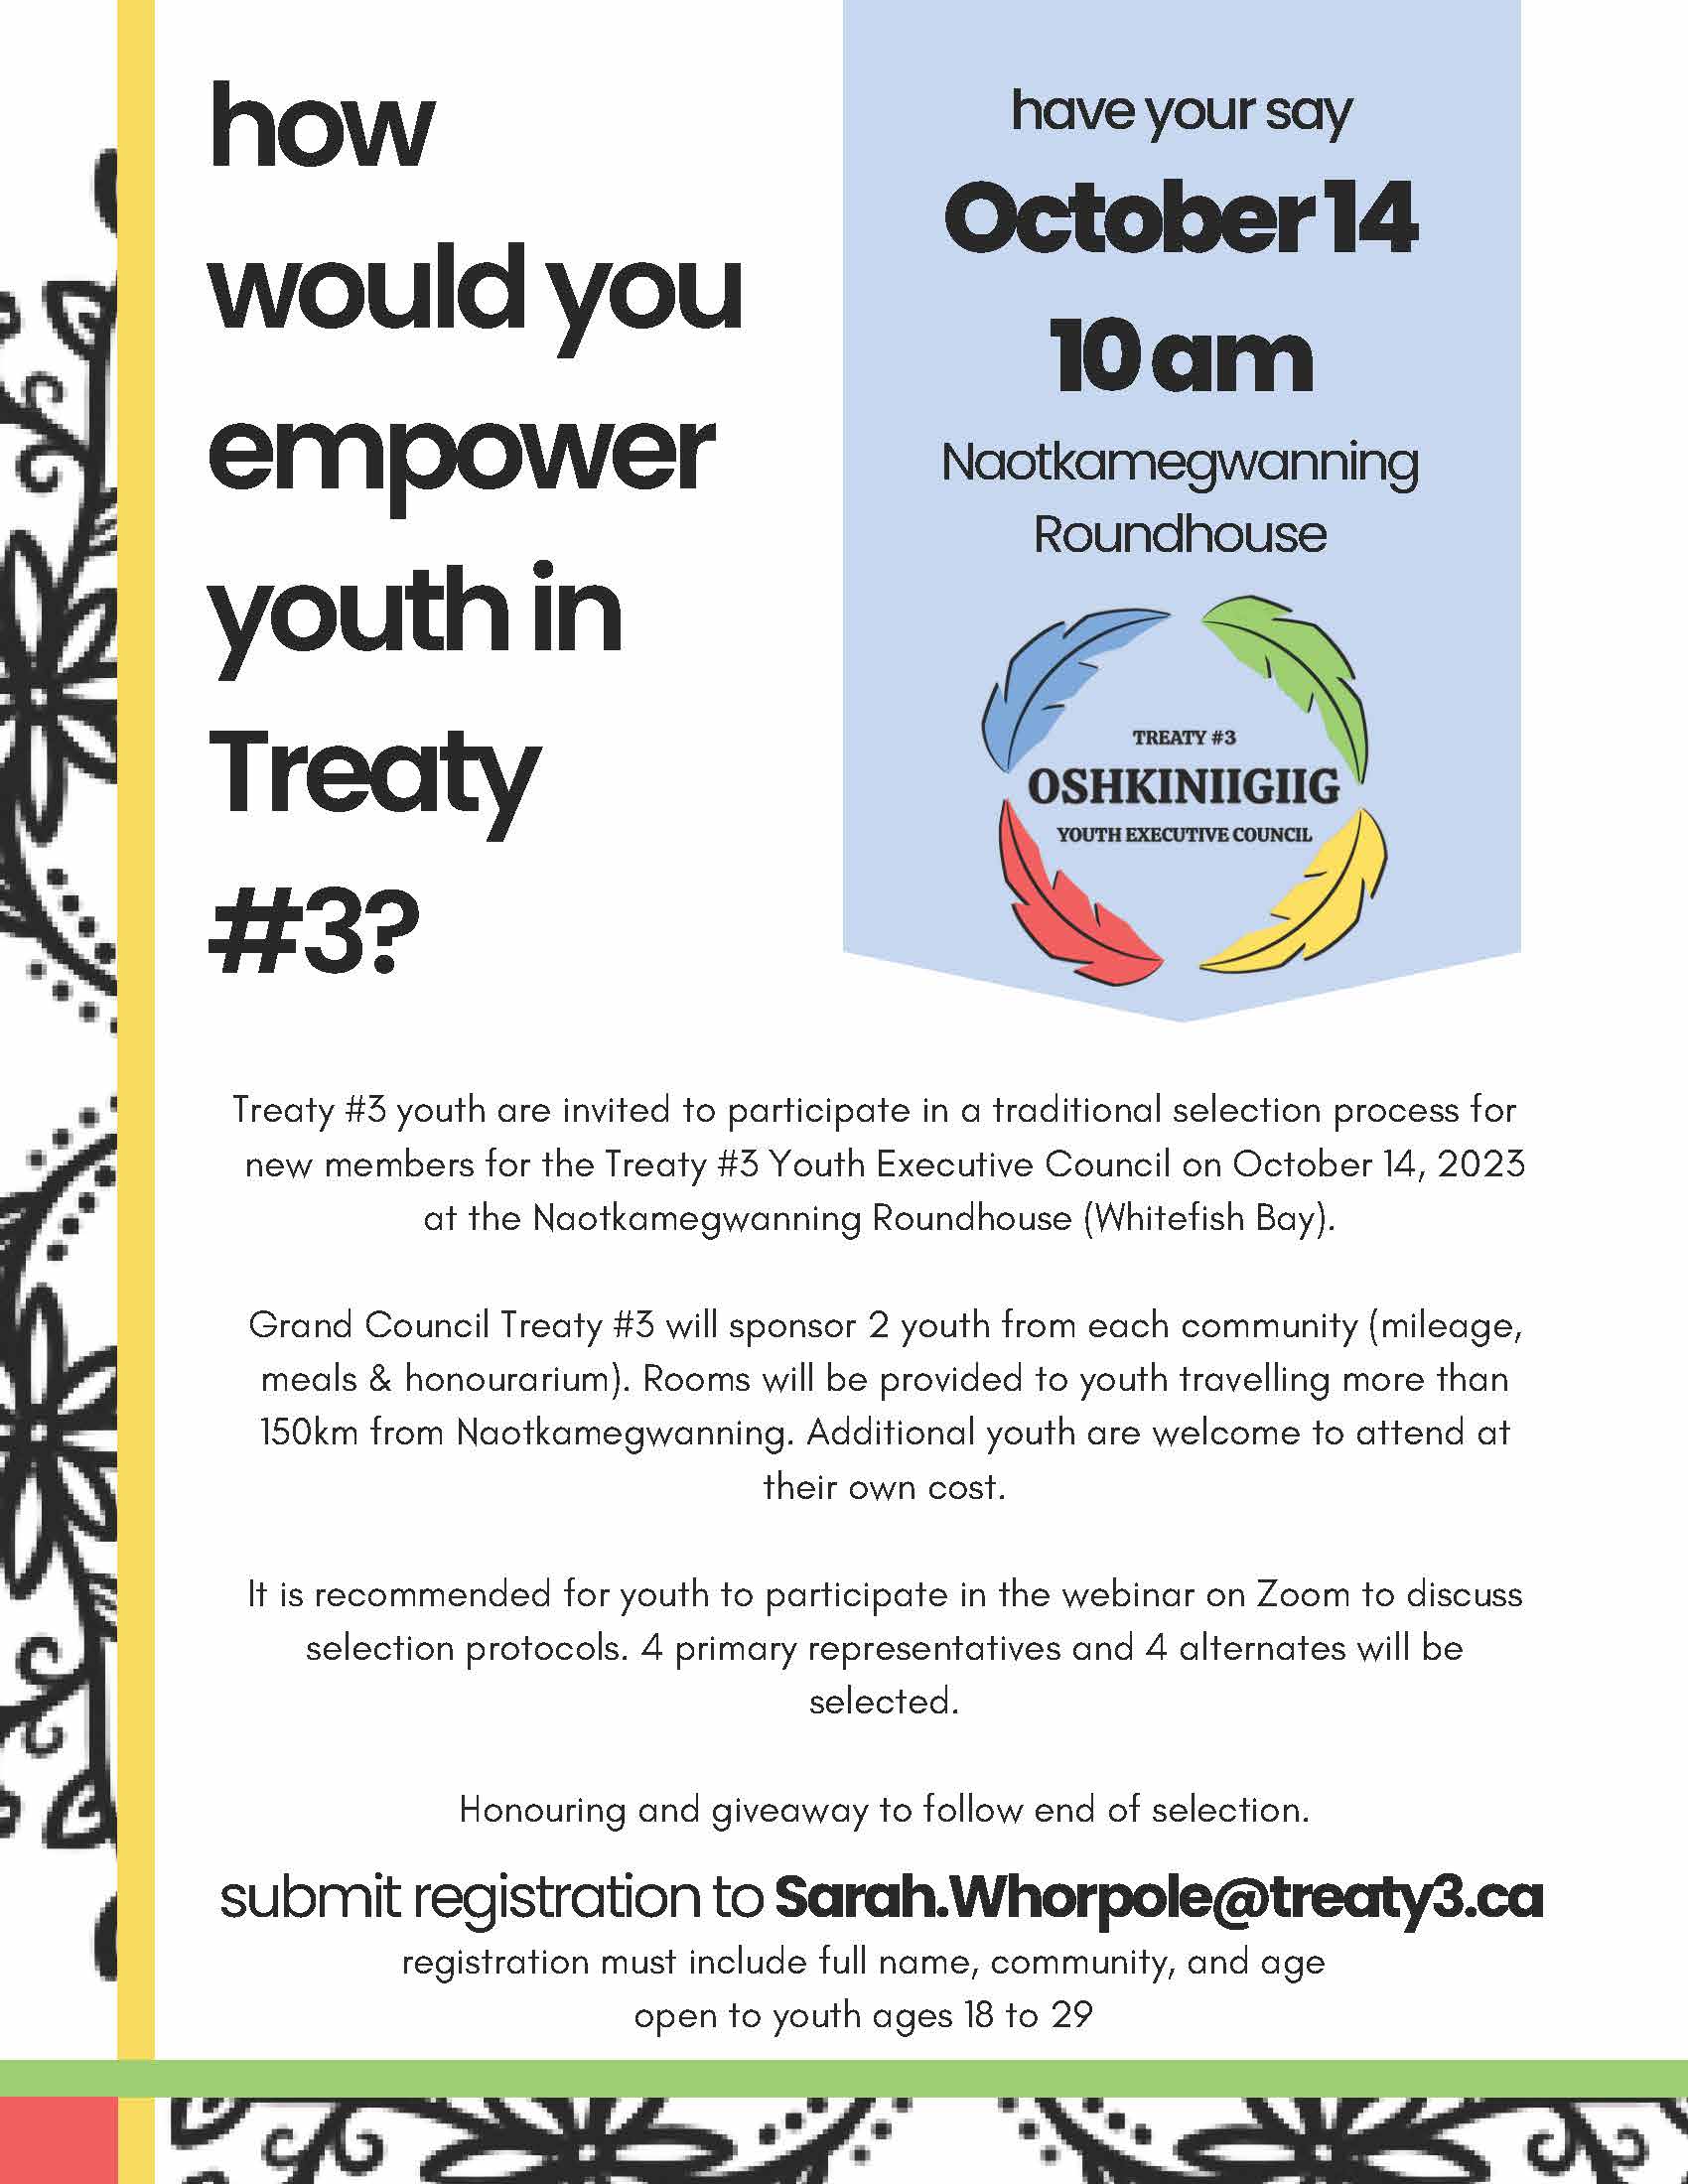 Treaty #3 Youth Executive Council Traditional Selection